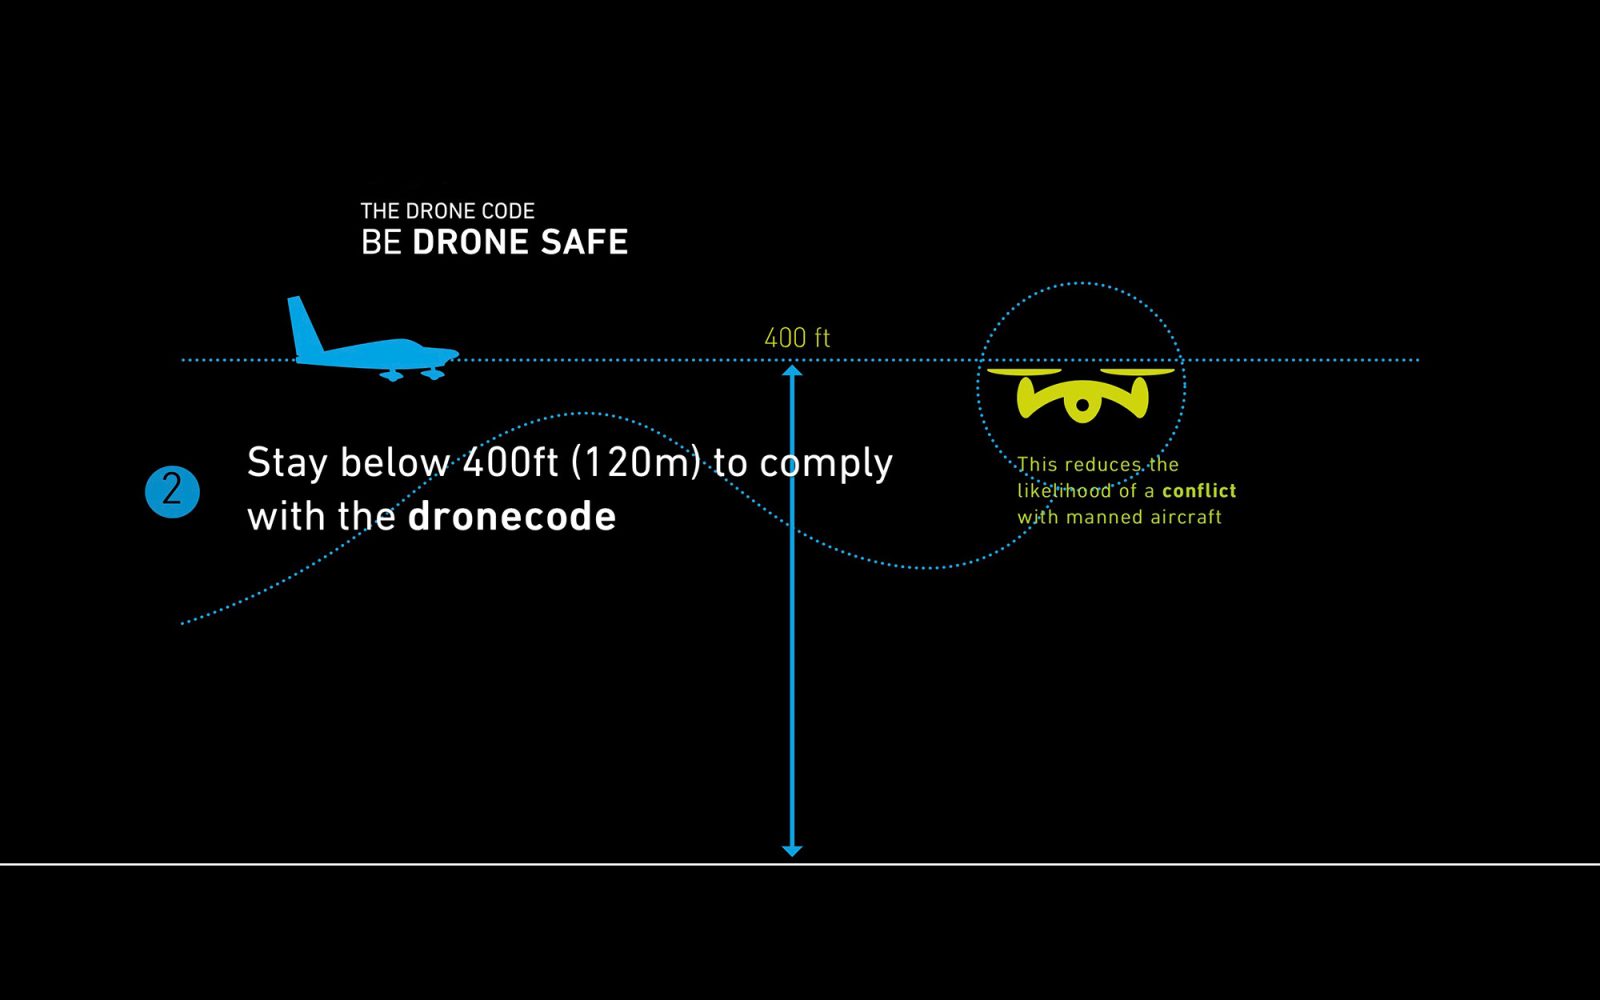 New UK drone rules to improve aviation safety come into effect today